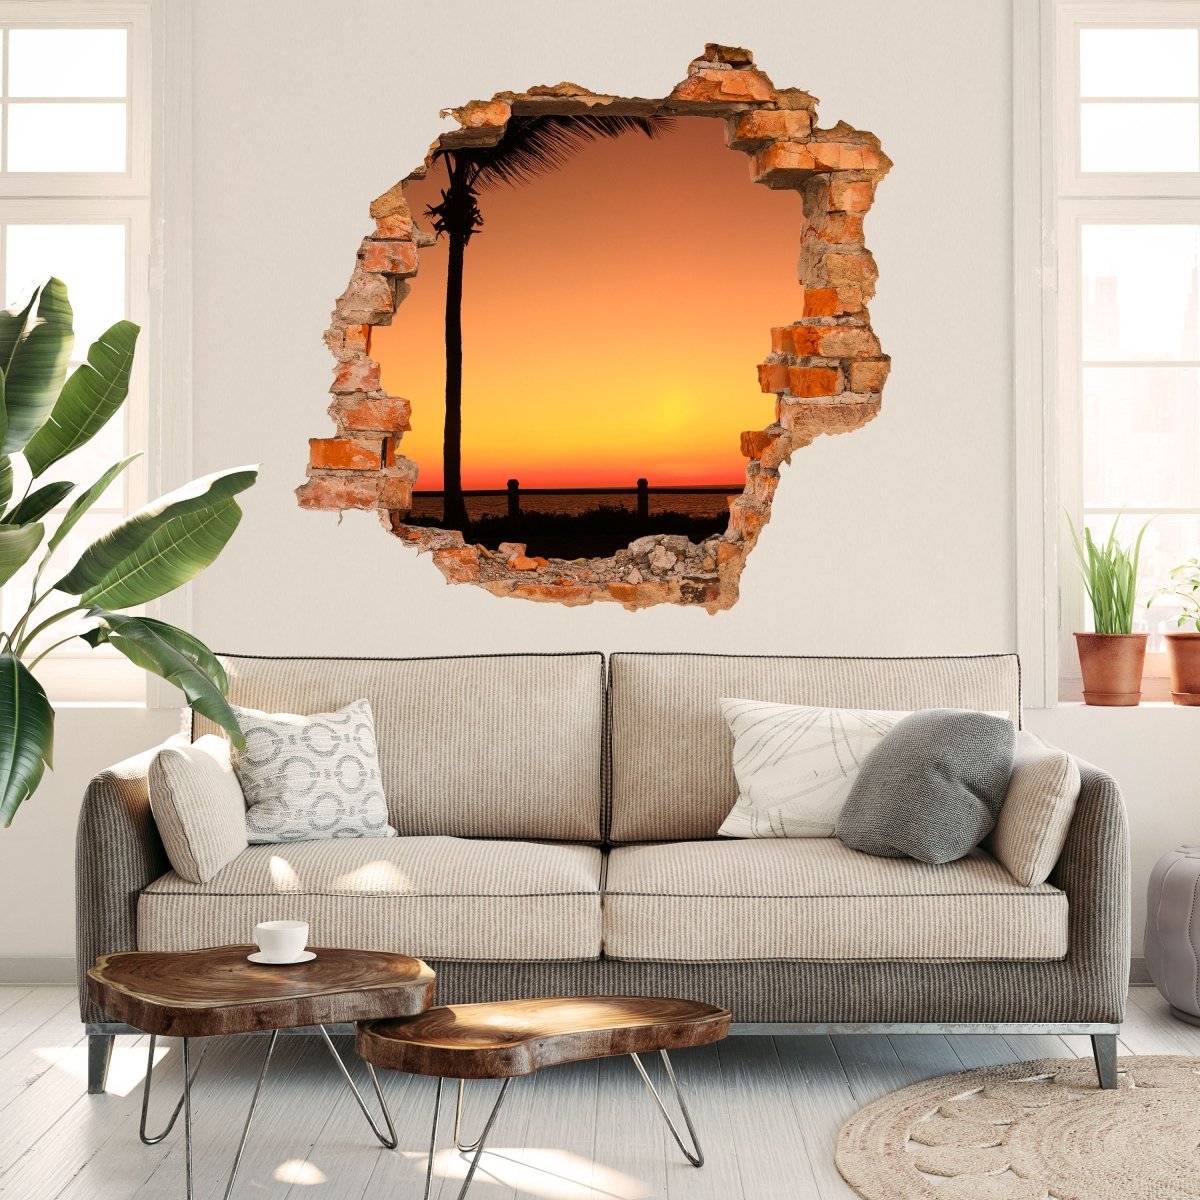 3D Wall Sticker Broome Sunset 2 Nature - Wall Decal M0208